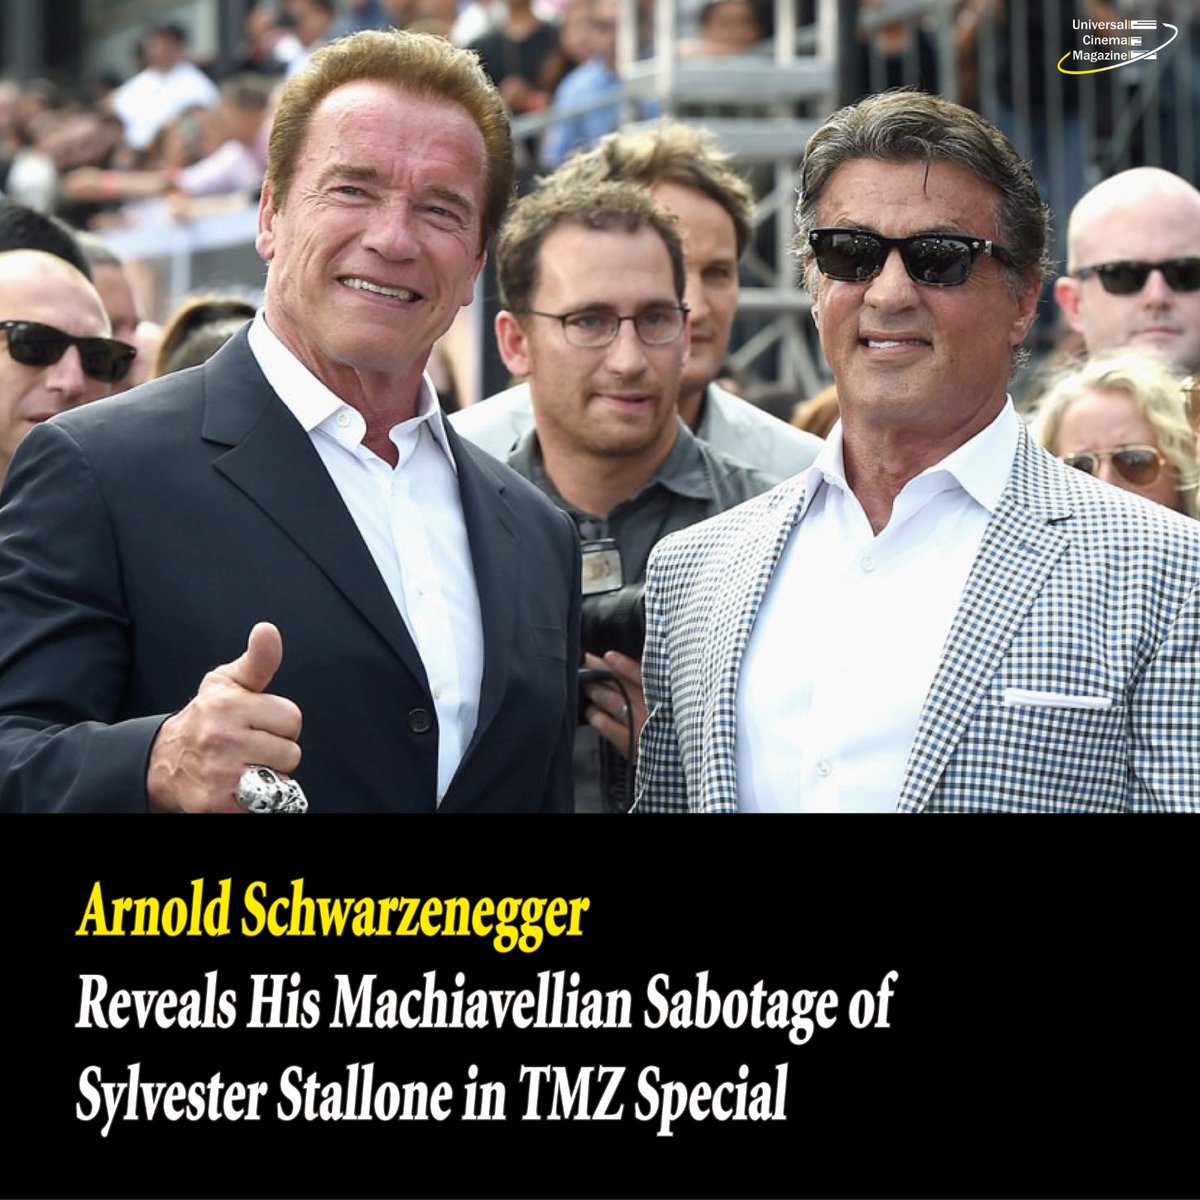 As two titans of Tinseltown in the 1980s and early 1990s, Sylvester Stallone and Arnold Schwarzenegger found ideal rivals in one another and grew so competitive that the Hollywood...

Link in bio
Source:hollywoodreporter

#arnoldschwarzenegger #sylvesterstallone #hollywood #tmz